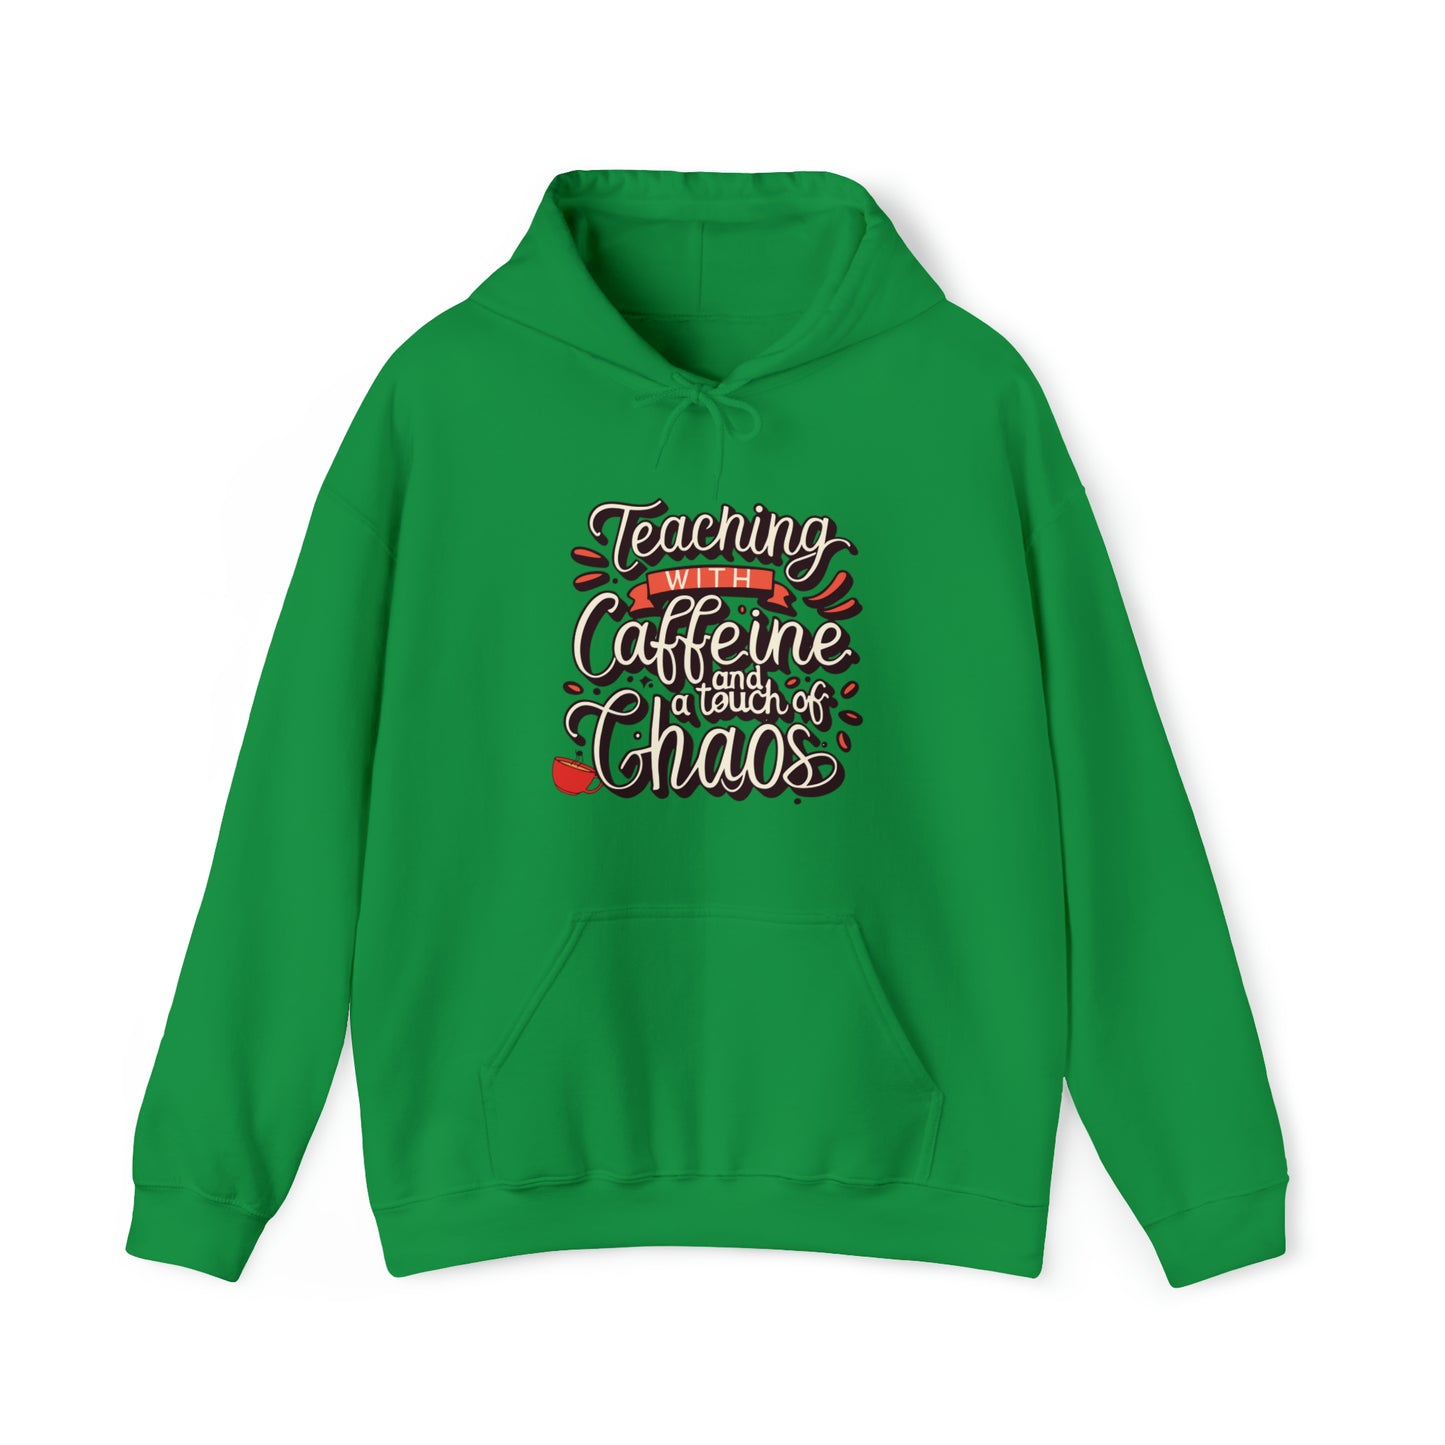 Teacher Hoodie - "Teaching with Caffeine and a Touch of Chaos"